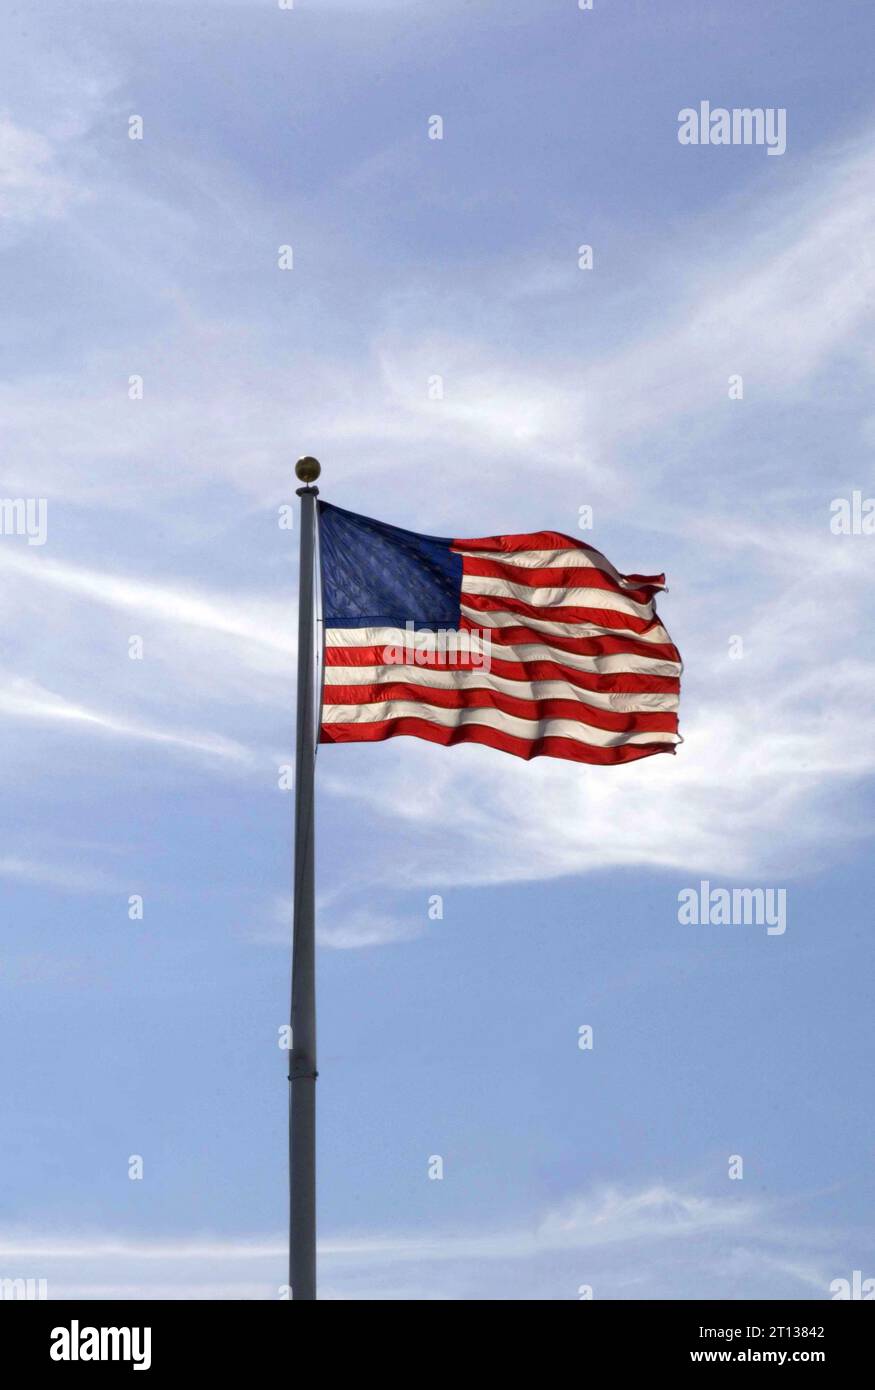 The US flag with stars and stripes blowing in the breeze on a sunny day. Stock Photo